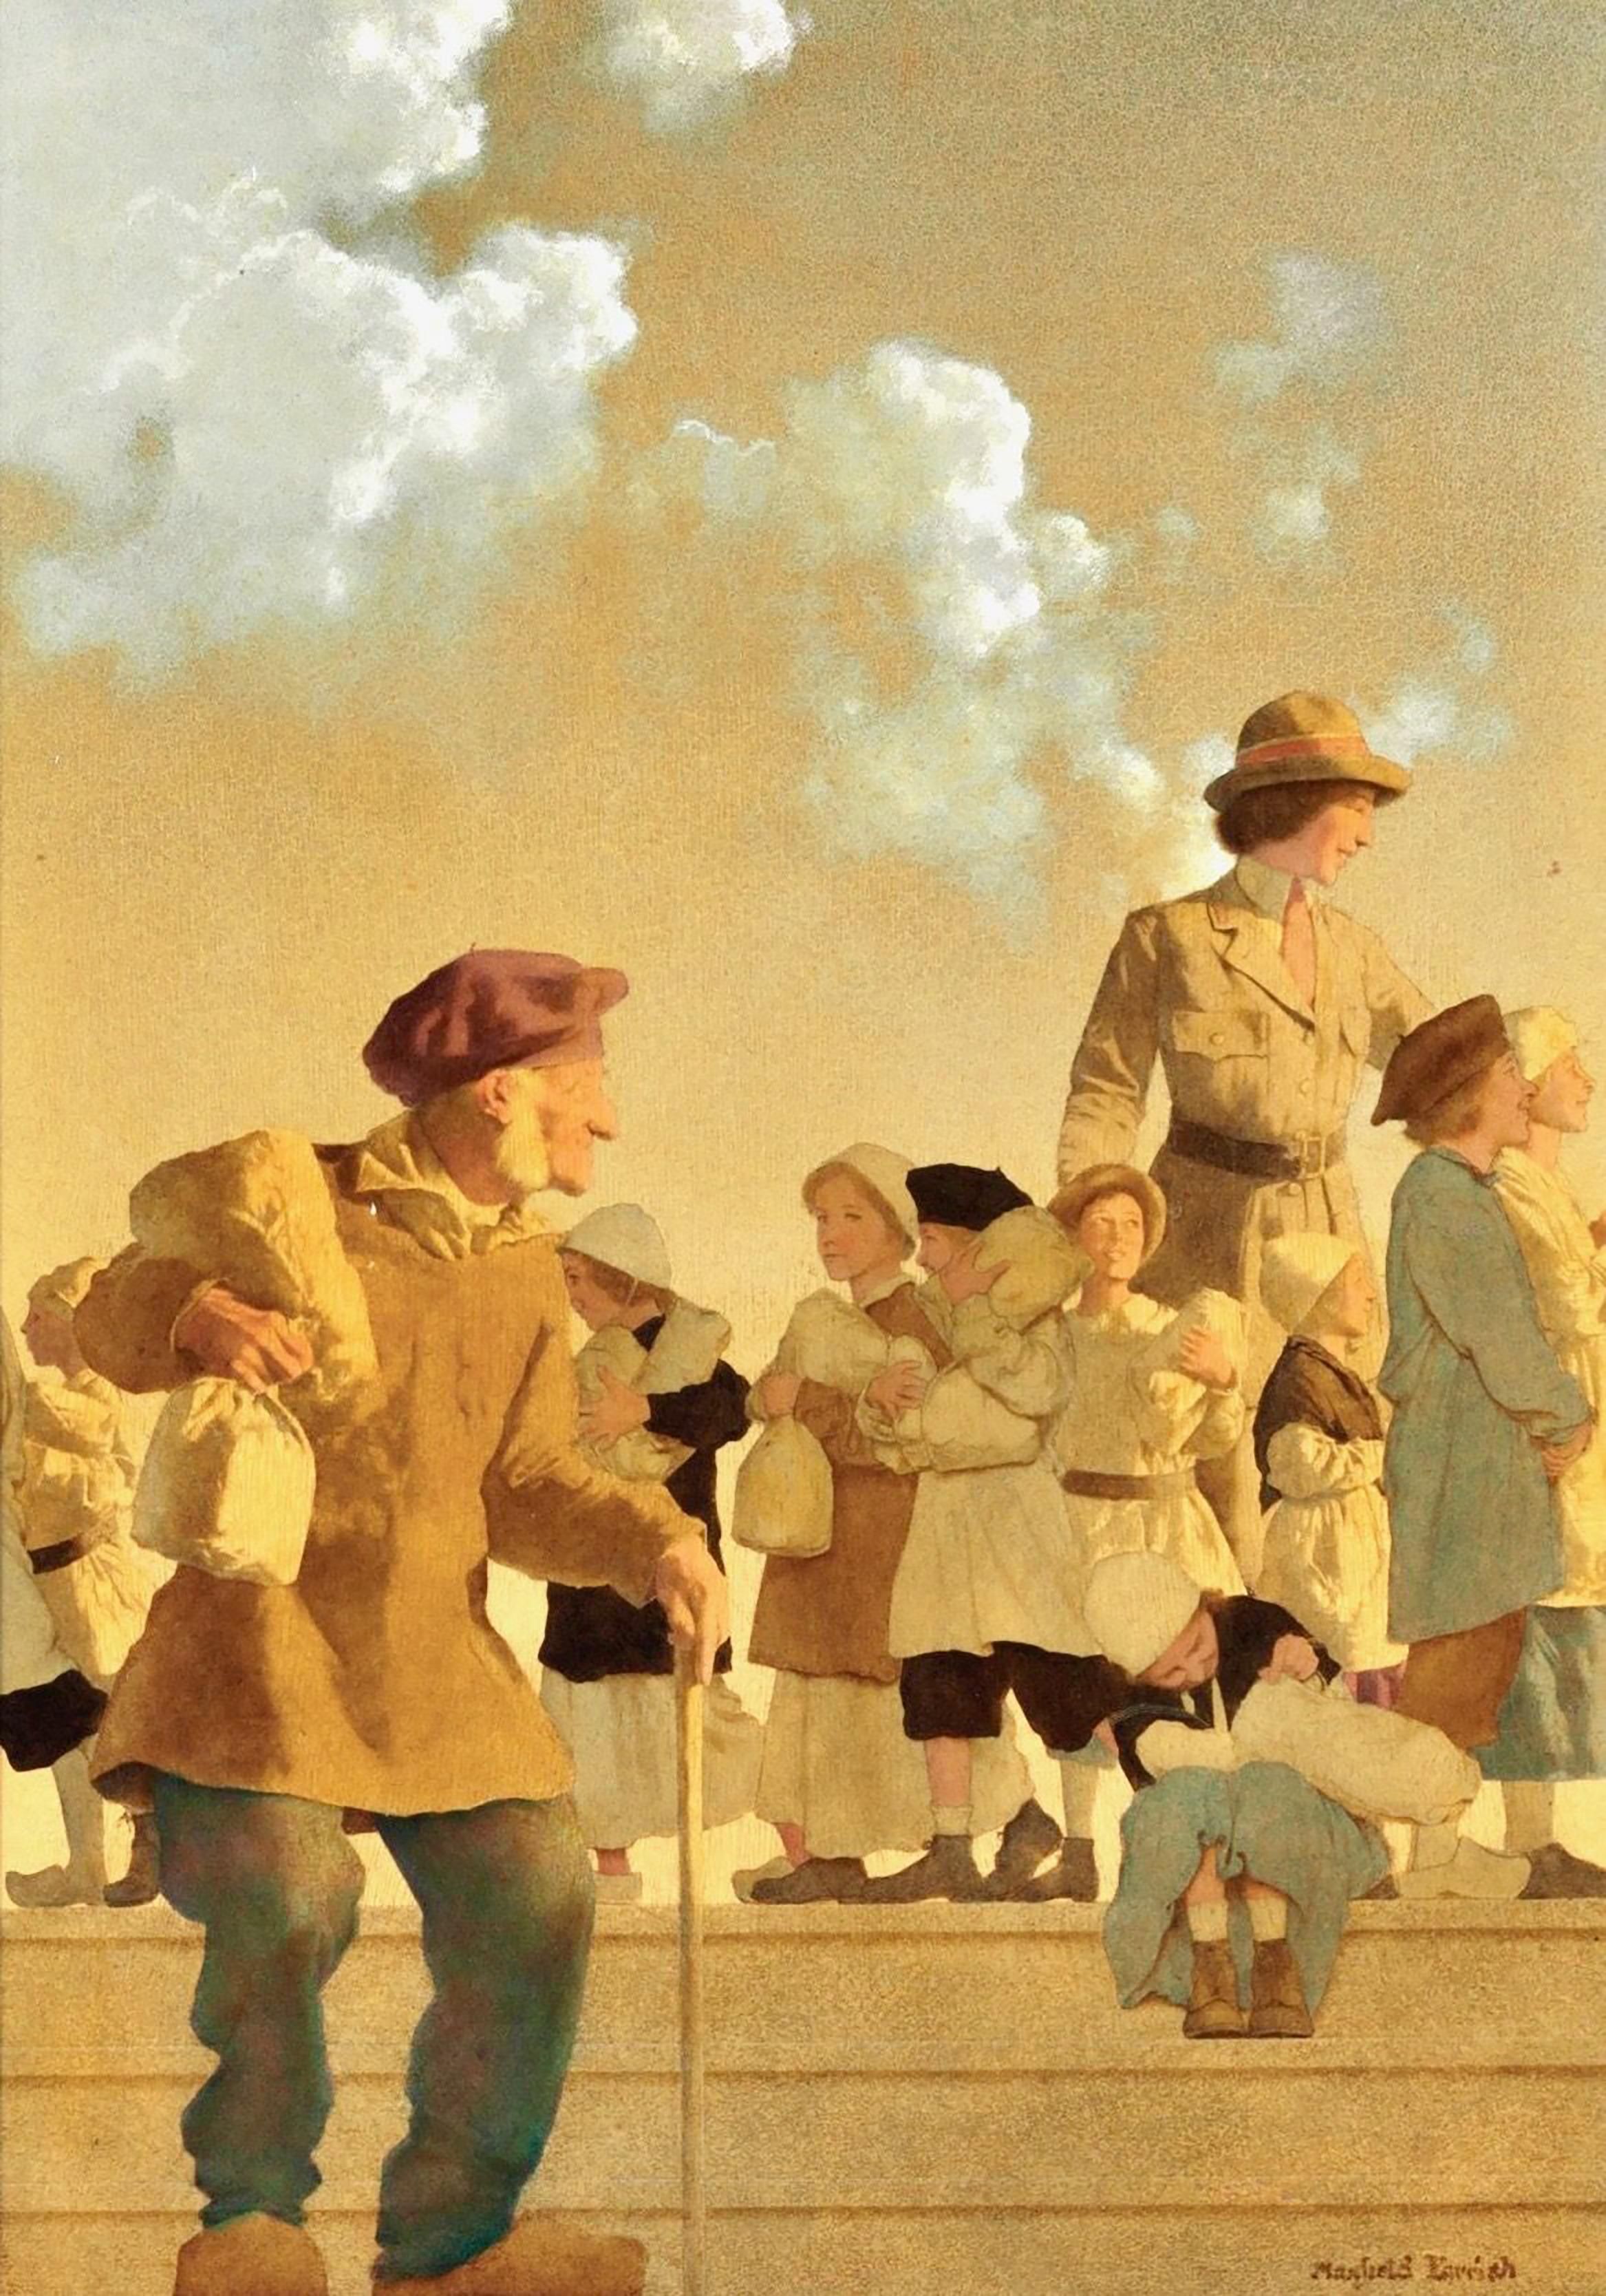 Maxfield Parrish Figurative Painting - Original Illustration for The Red Cross